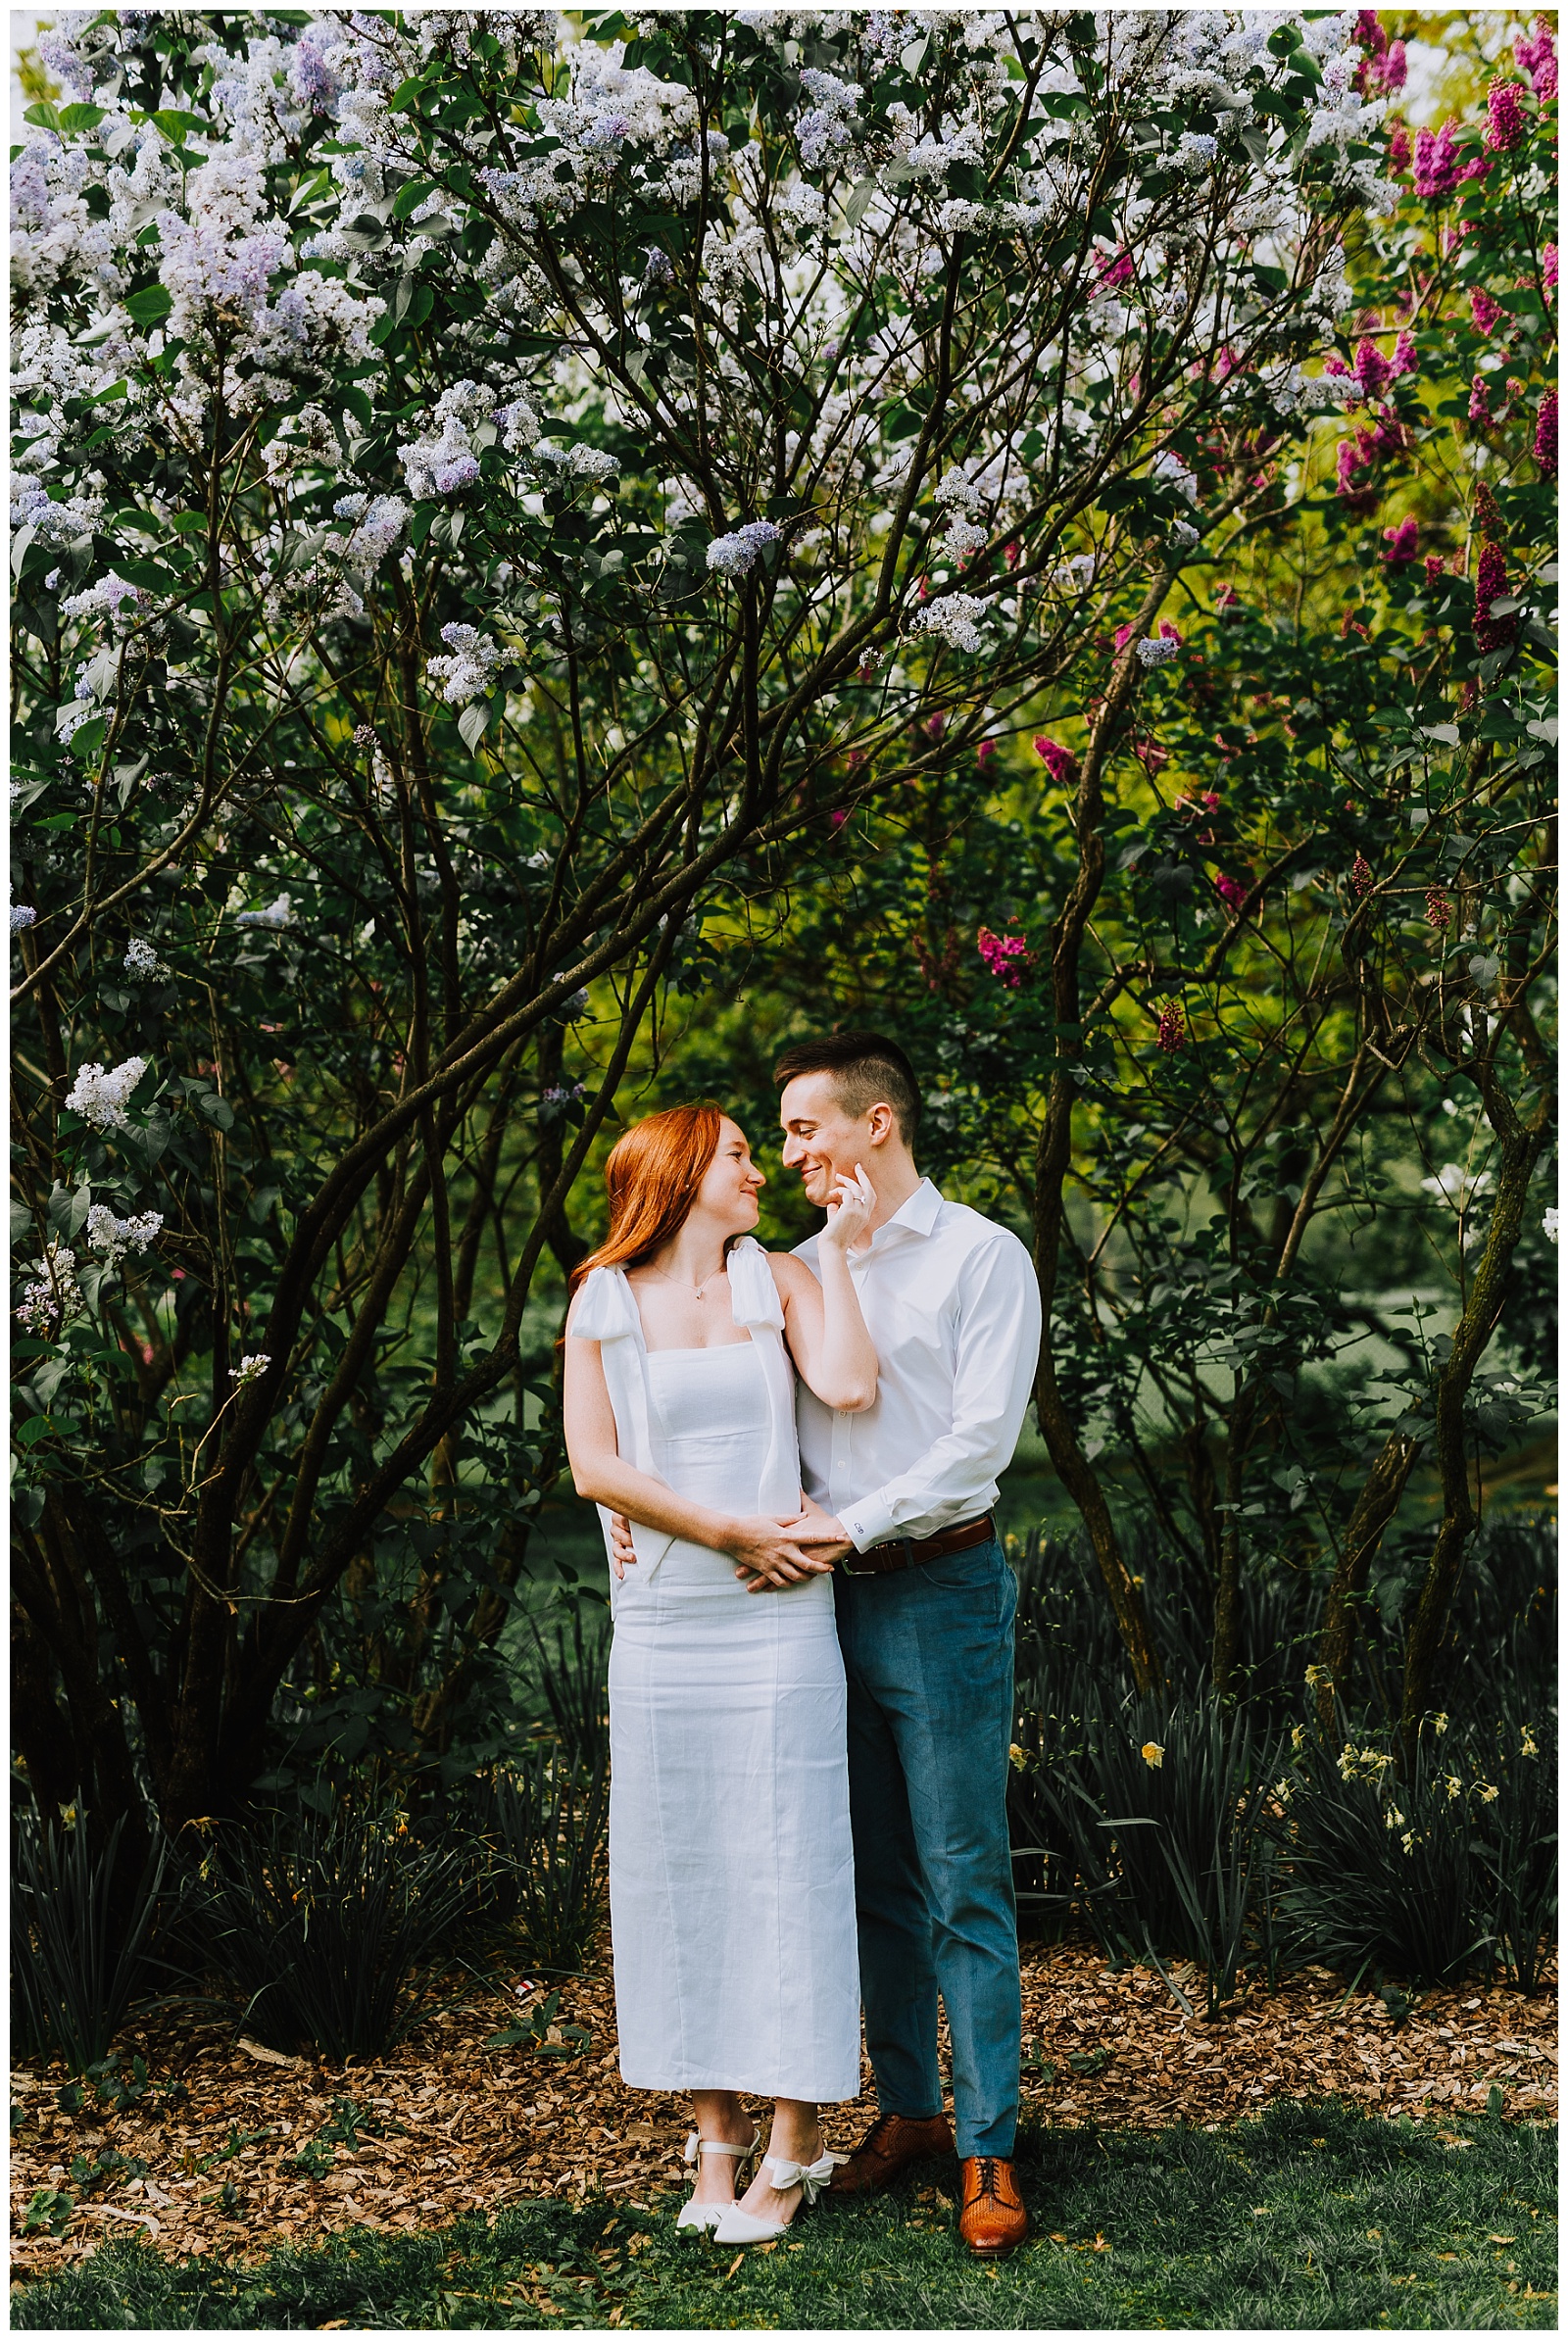 Captivating Springtime Engagement Session in NYC